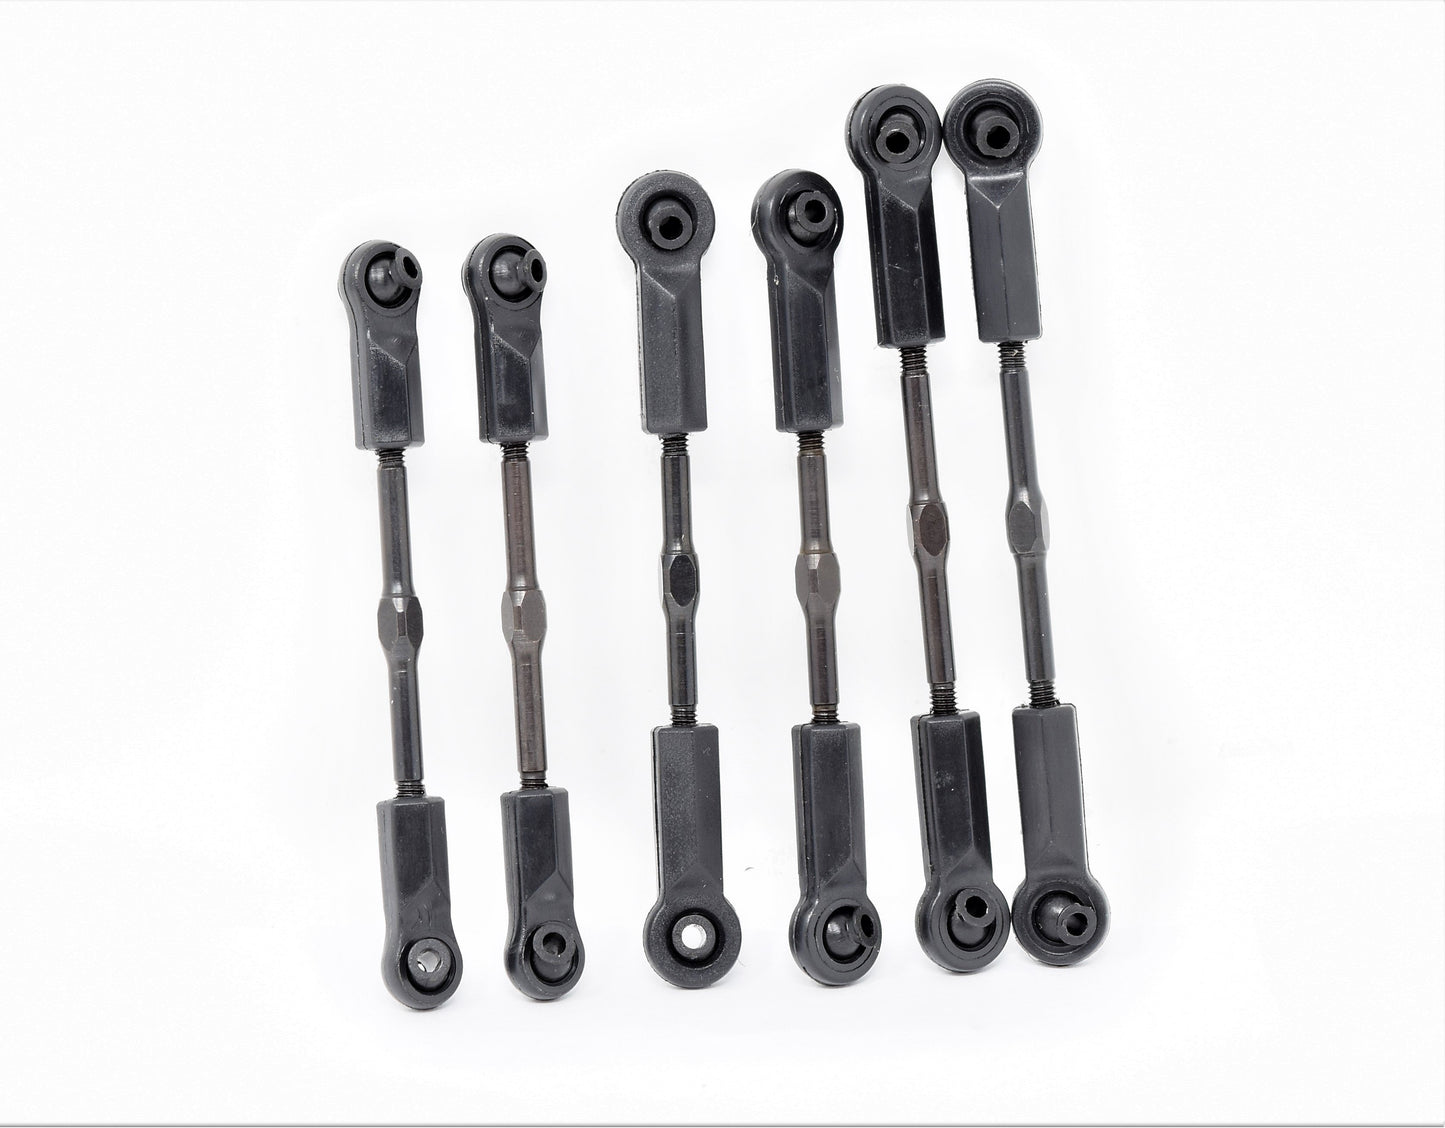 Arrma KRATON 4x4 4s BLX - Tie Rods, Steel Turnbuckles F/R outcast ARA102690 - Dirt Cheap RC SAVING YOU MONEY, ONE PART AT A TIME